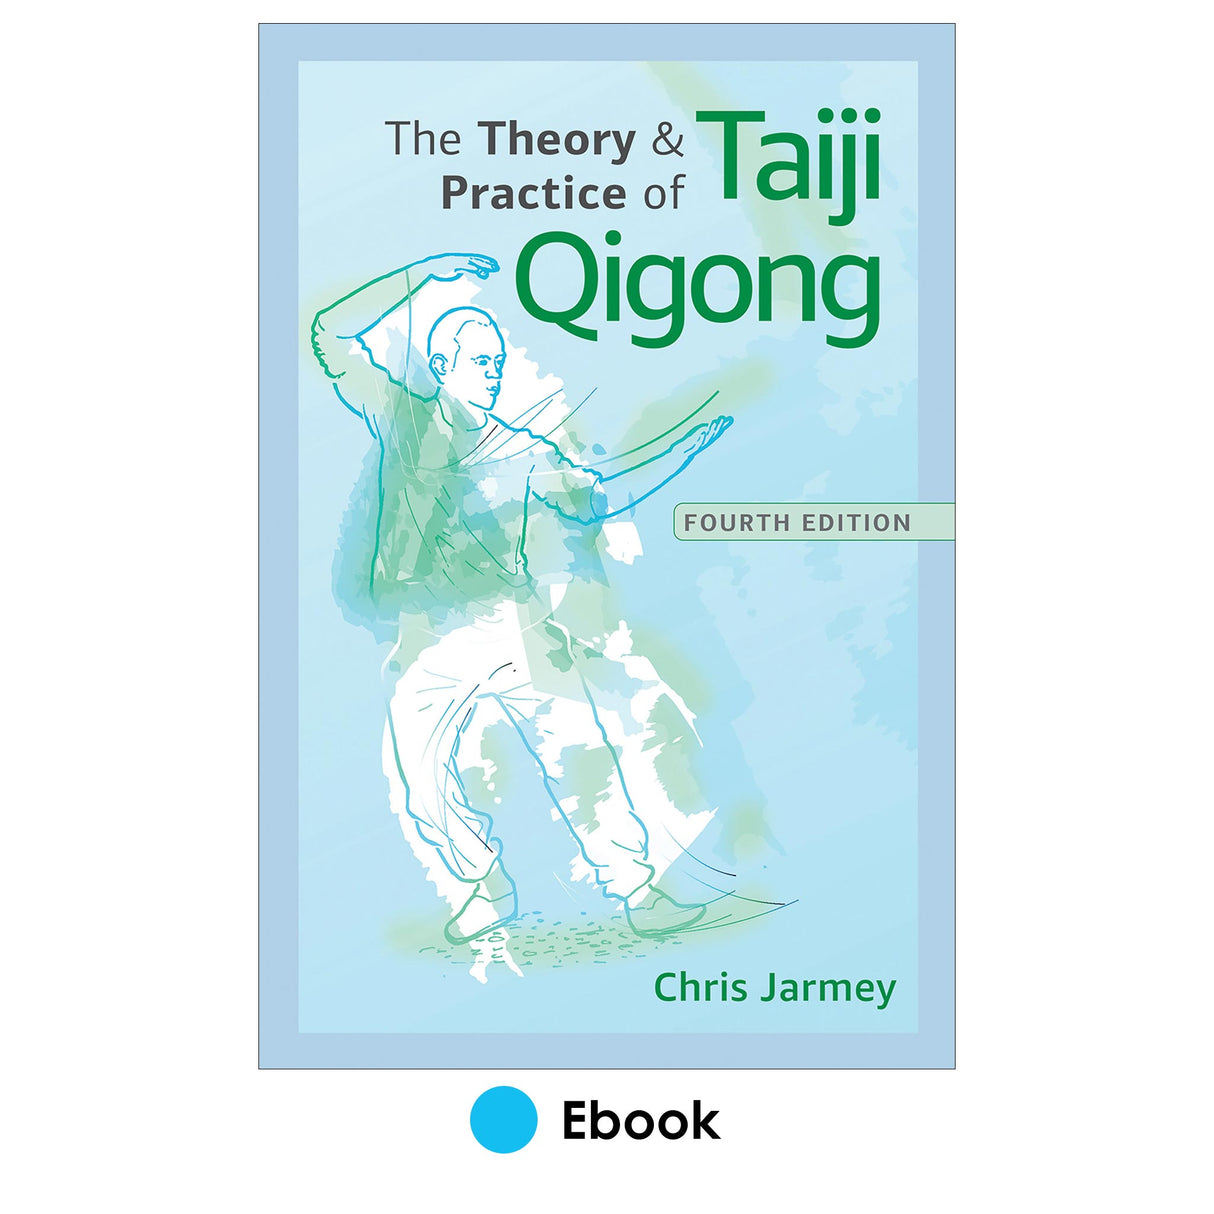 Theory and Practice of Taiji Qigong 4th Edition epub, The